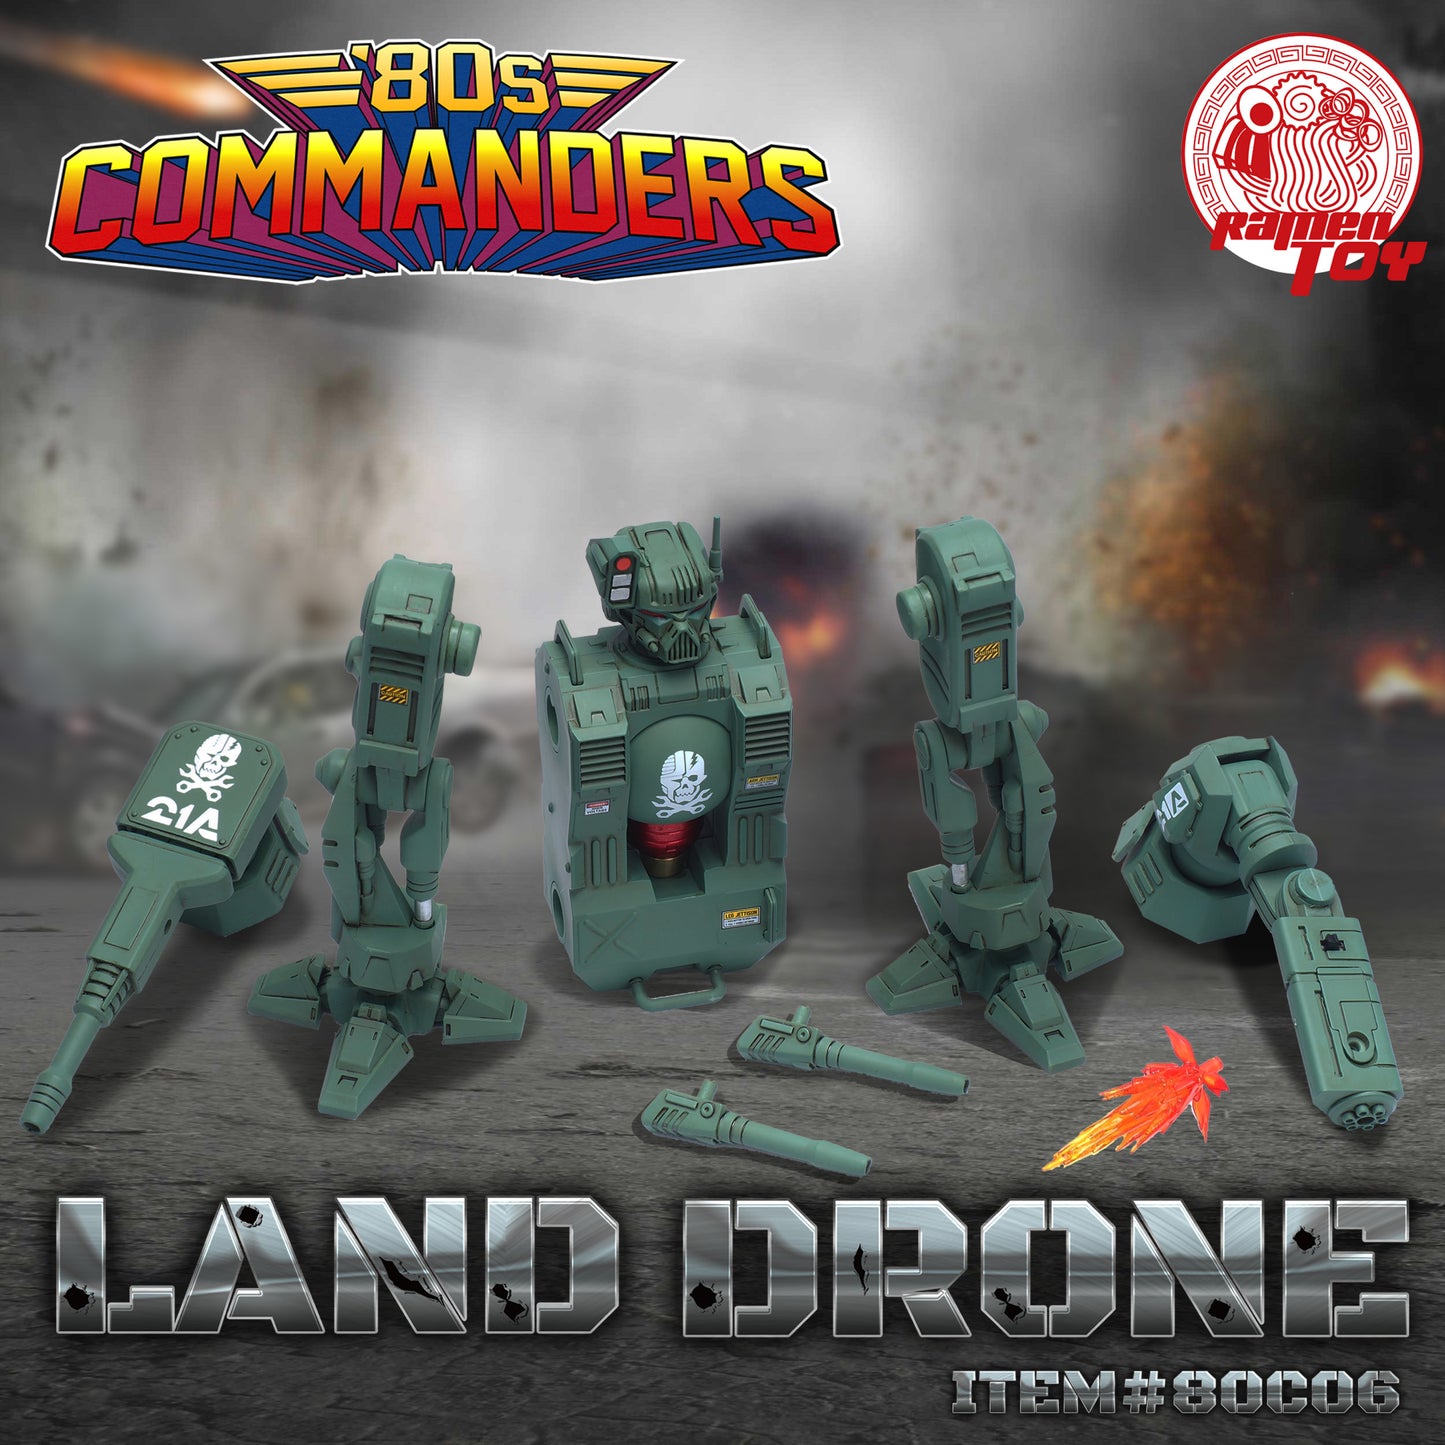 ITEM #80C06 - 80s Commanders Land Drone #SPECIAL